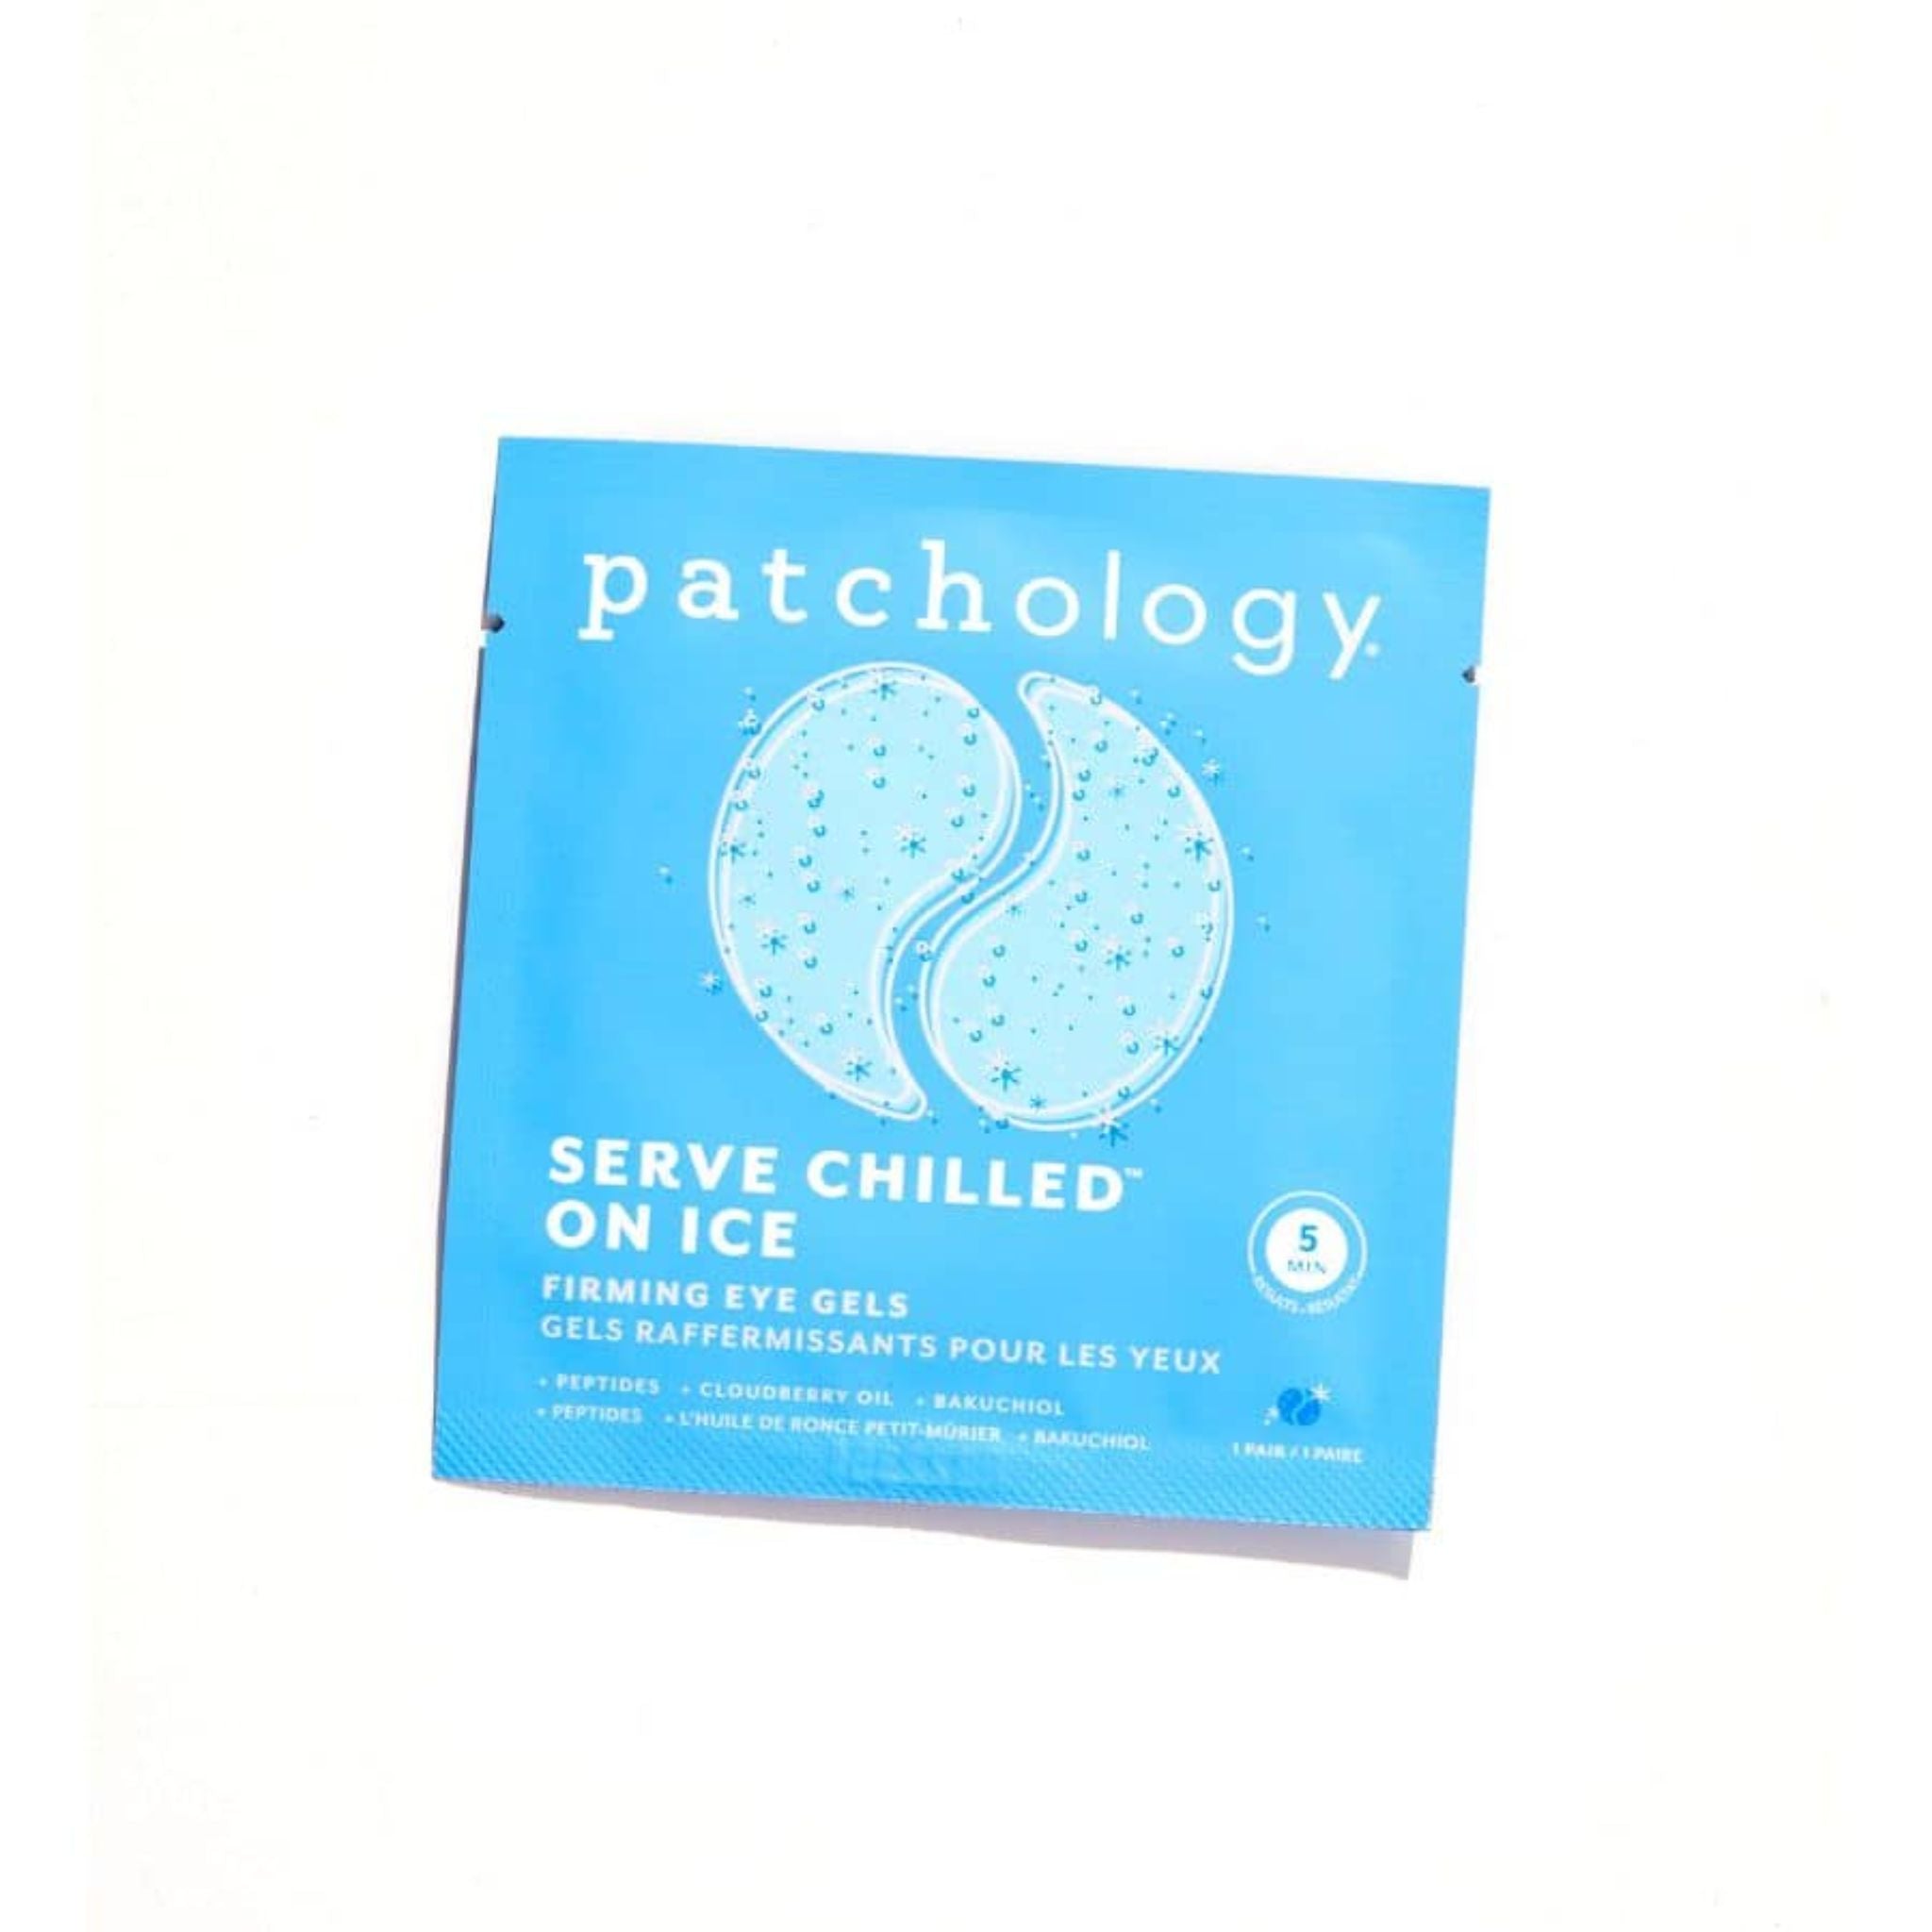 Patchology - Serve Chilled On Ice Hydrogel Firming Eye Gels (5 Pack)